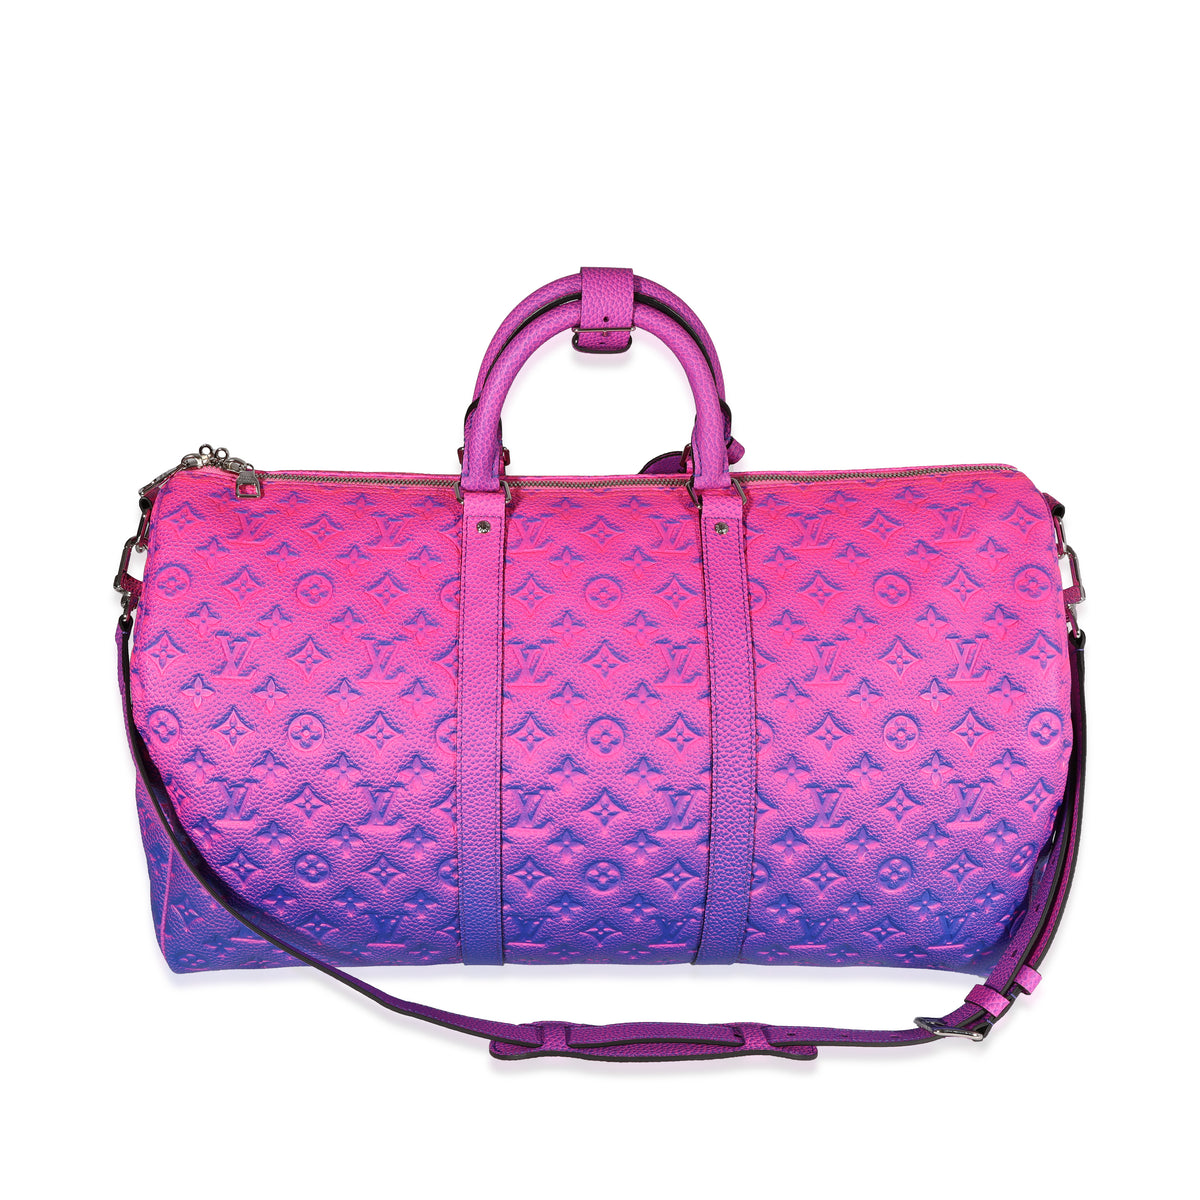 Louis Vuitton Keepall Bandouliere Bag Limited Edition Illusion